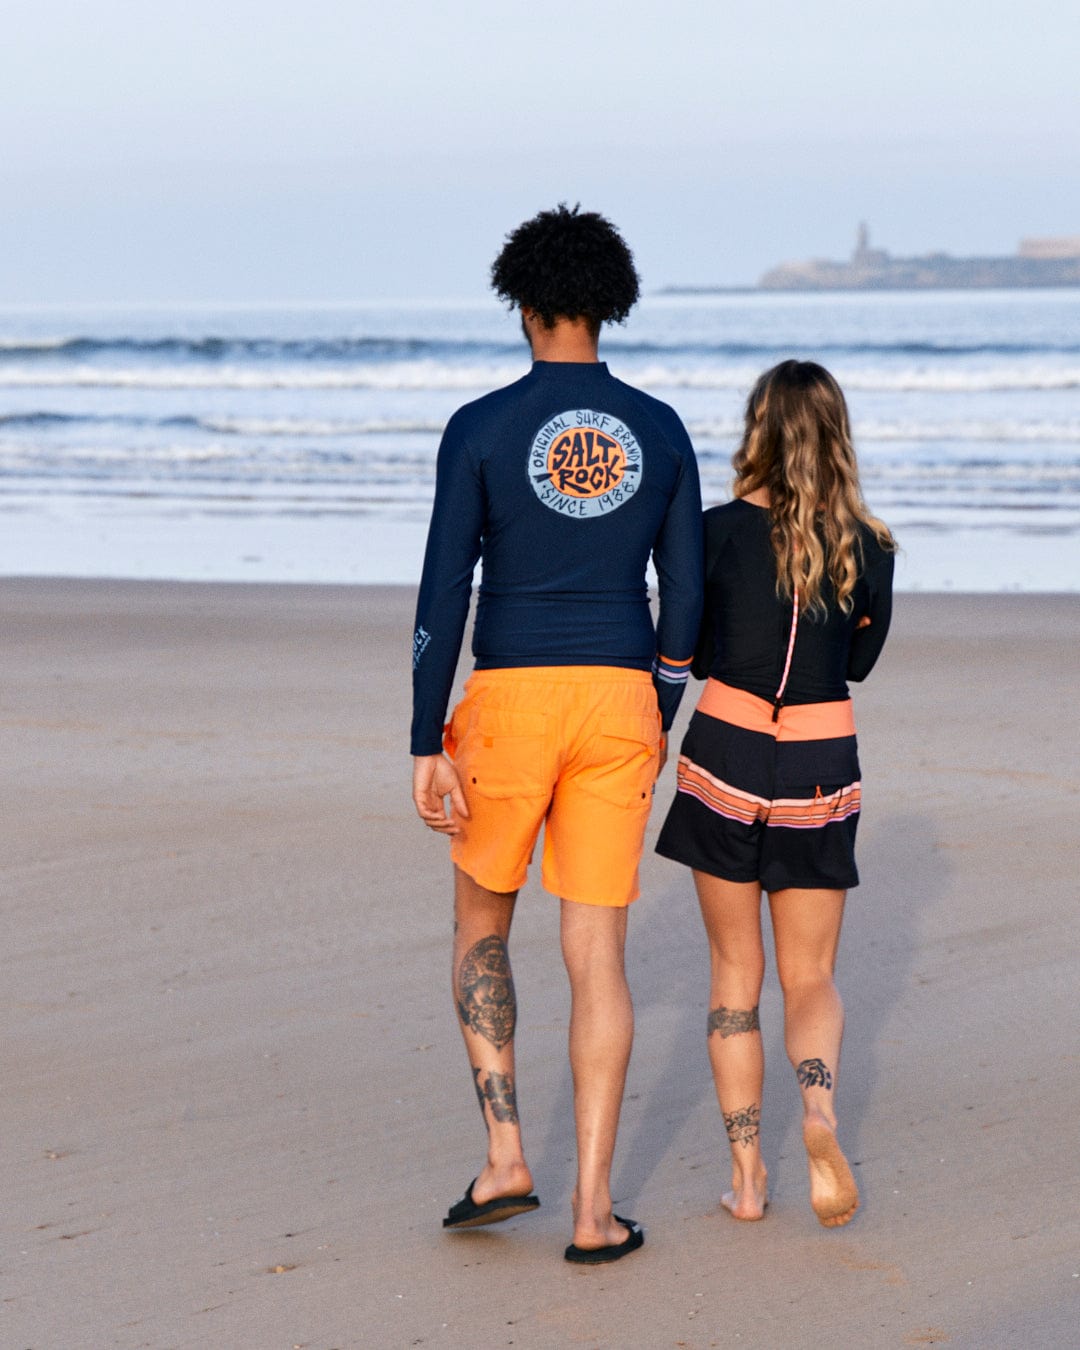 Two people in casual beachwear, including SR Original - Recycled Mens Long Sleeve Rashvest - Blue boardshorts by Saltrock, walking on the sand towards the ocean, with a lighthouse visible in the distance.